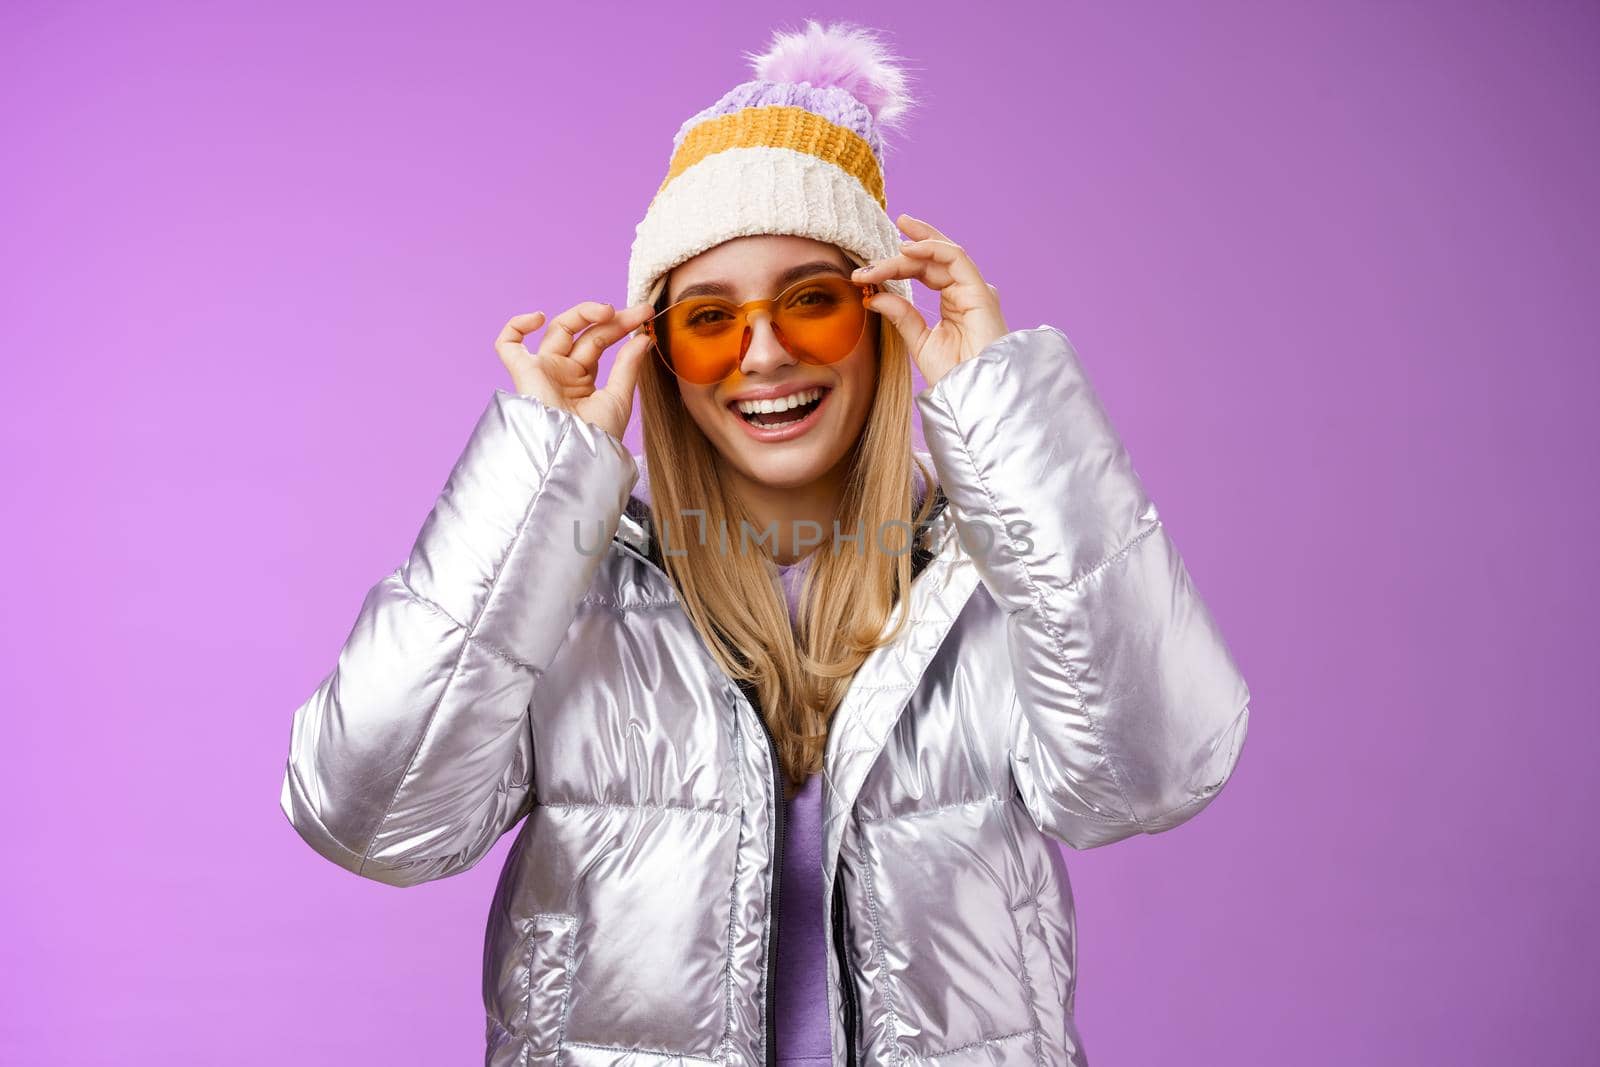 Good-looking charming happy smiling blond girlfriend having fun vacation girlfriends put on sunglasses grinning delighted wear cool silver glittering jacket warm winter hat, purple background.